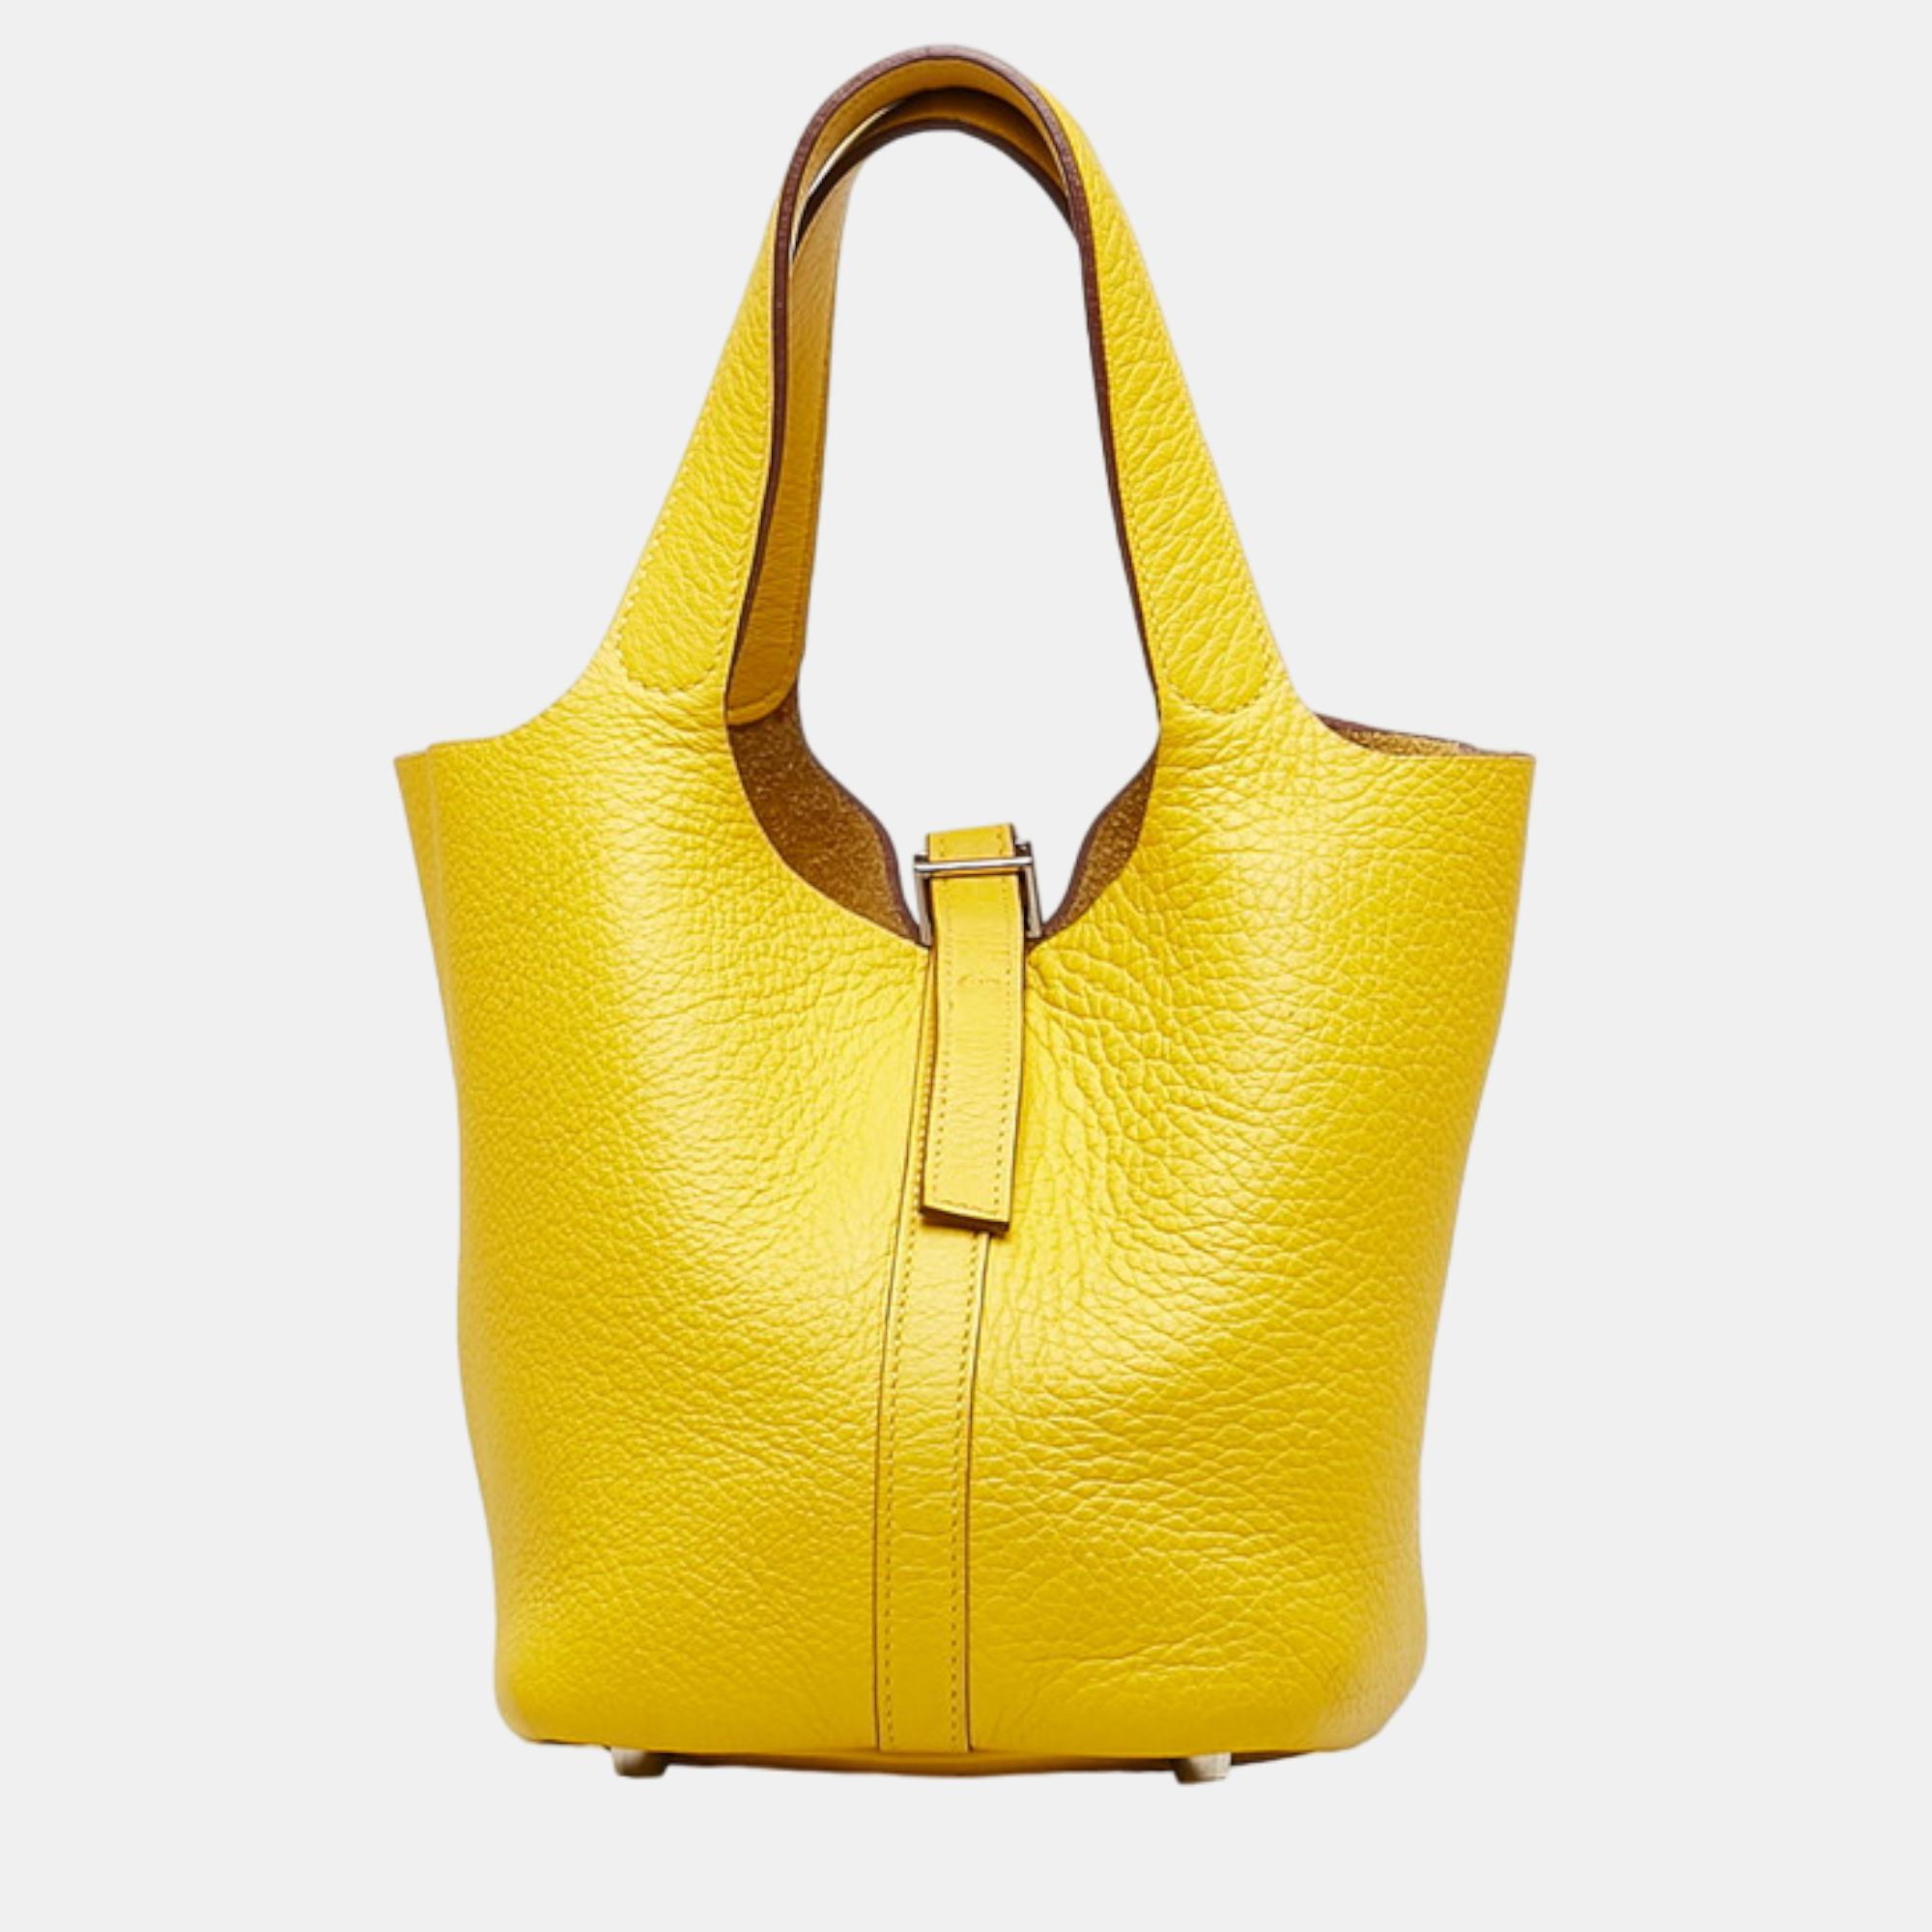 Hermes yellow clemence leather picotin lock 18 tote bag